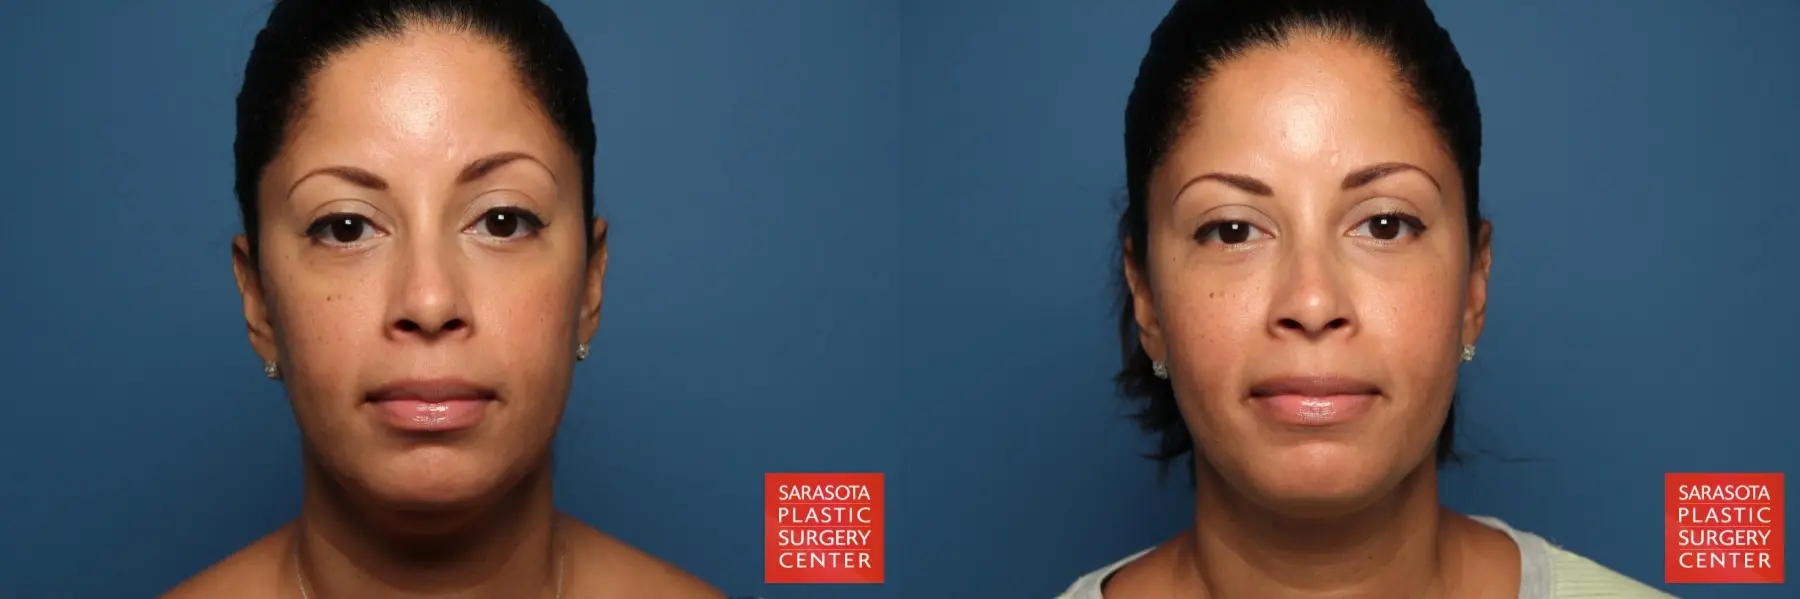 Facial Liposuction: Patient 3 - Before and After  